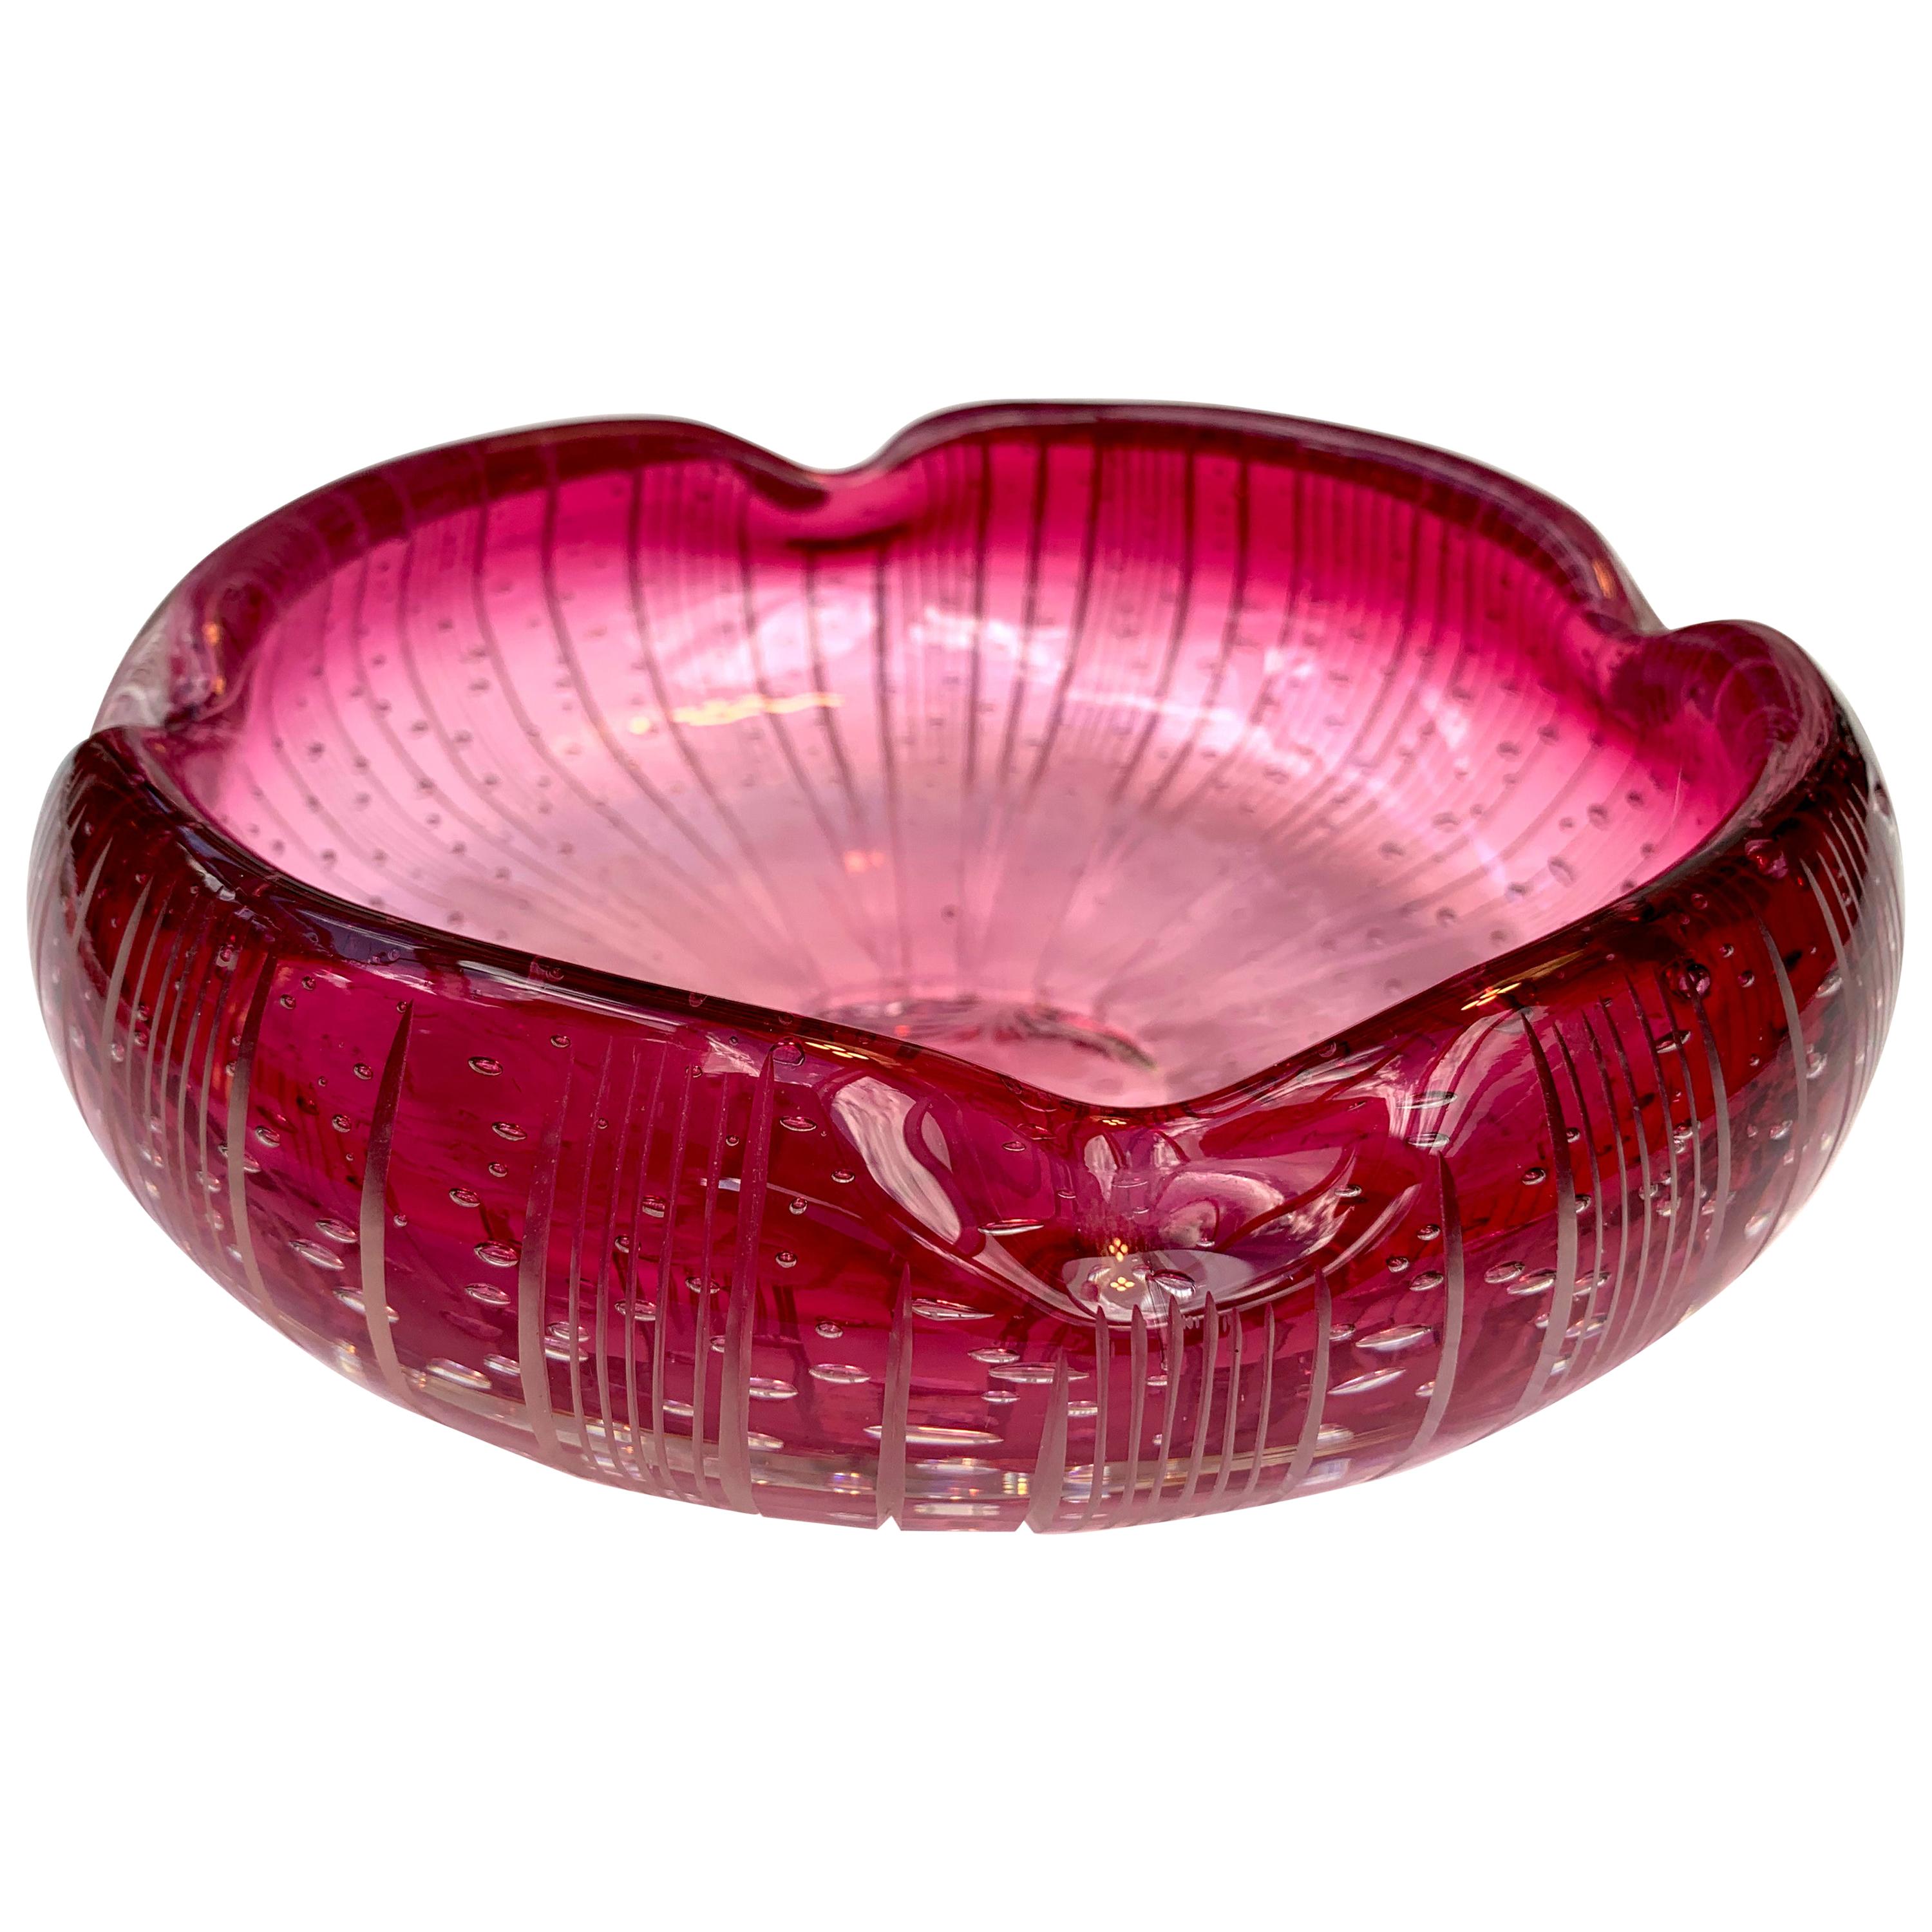 Red, Pink Glass Bowl with Engraved Flowers